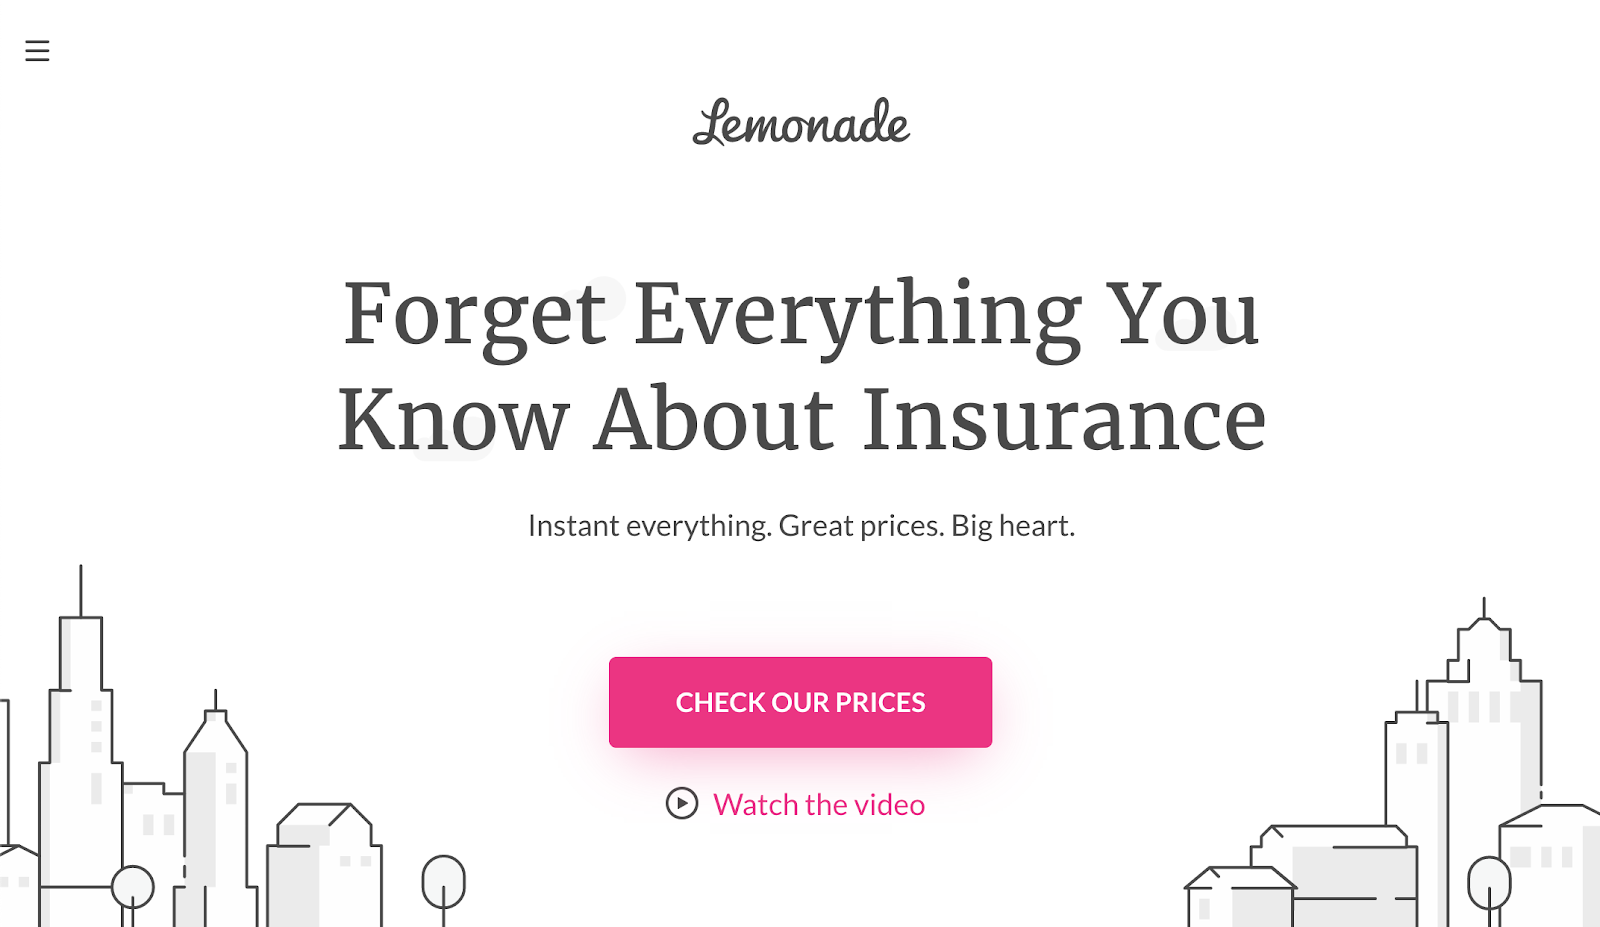 Lemonade's Homepage: Forget Everything You Know About Insurance